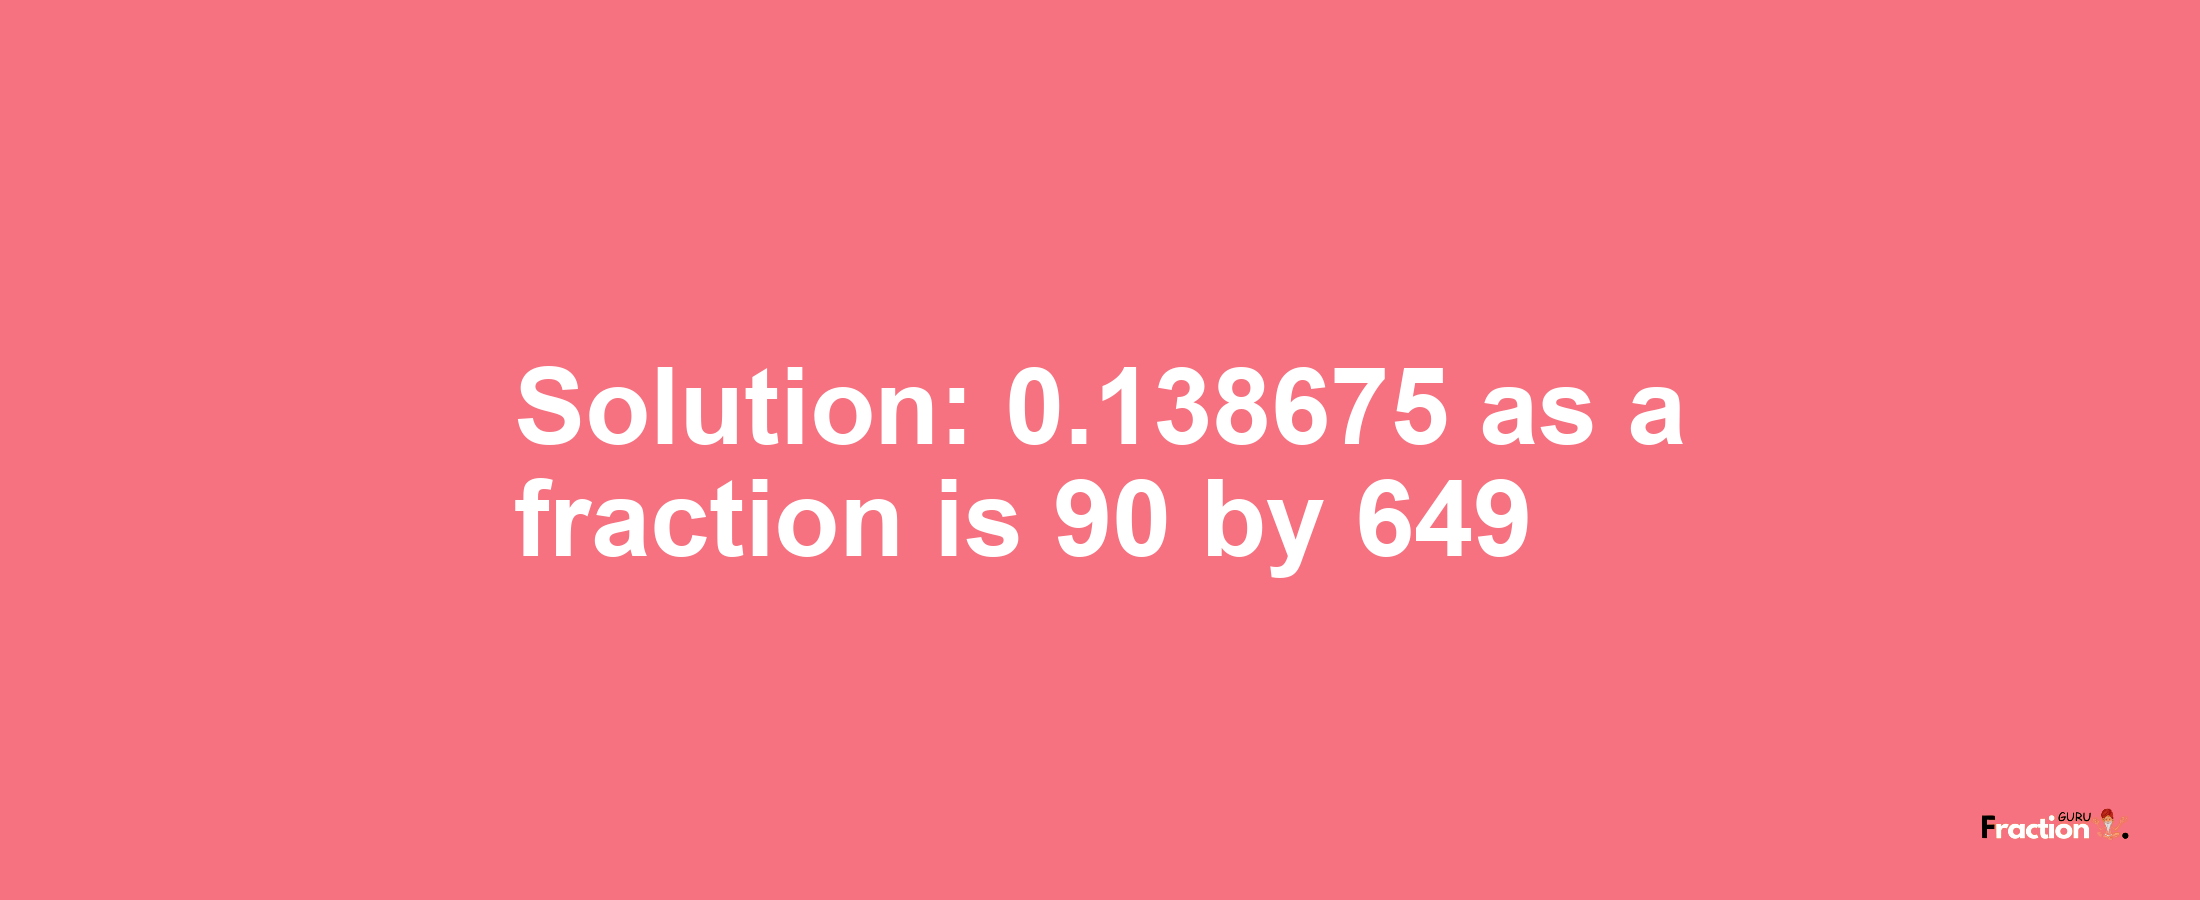 Solution:0.138675 as a fraction is 90/649